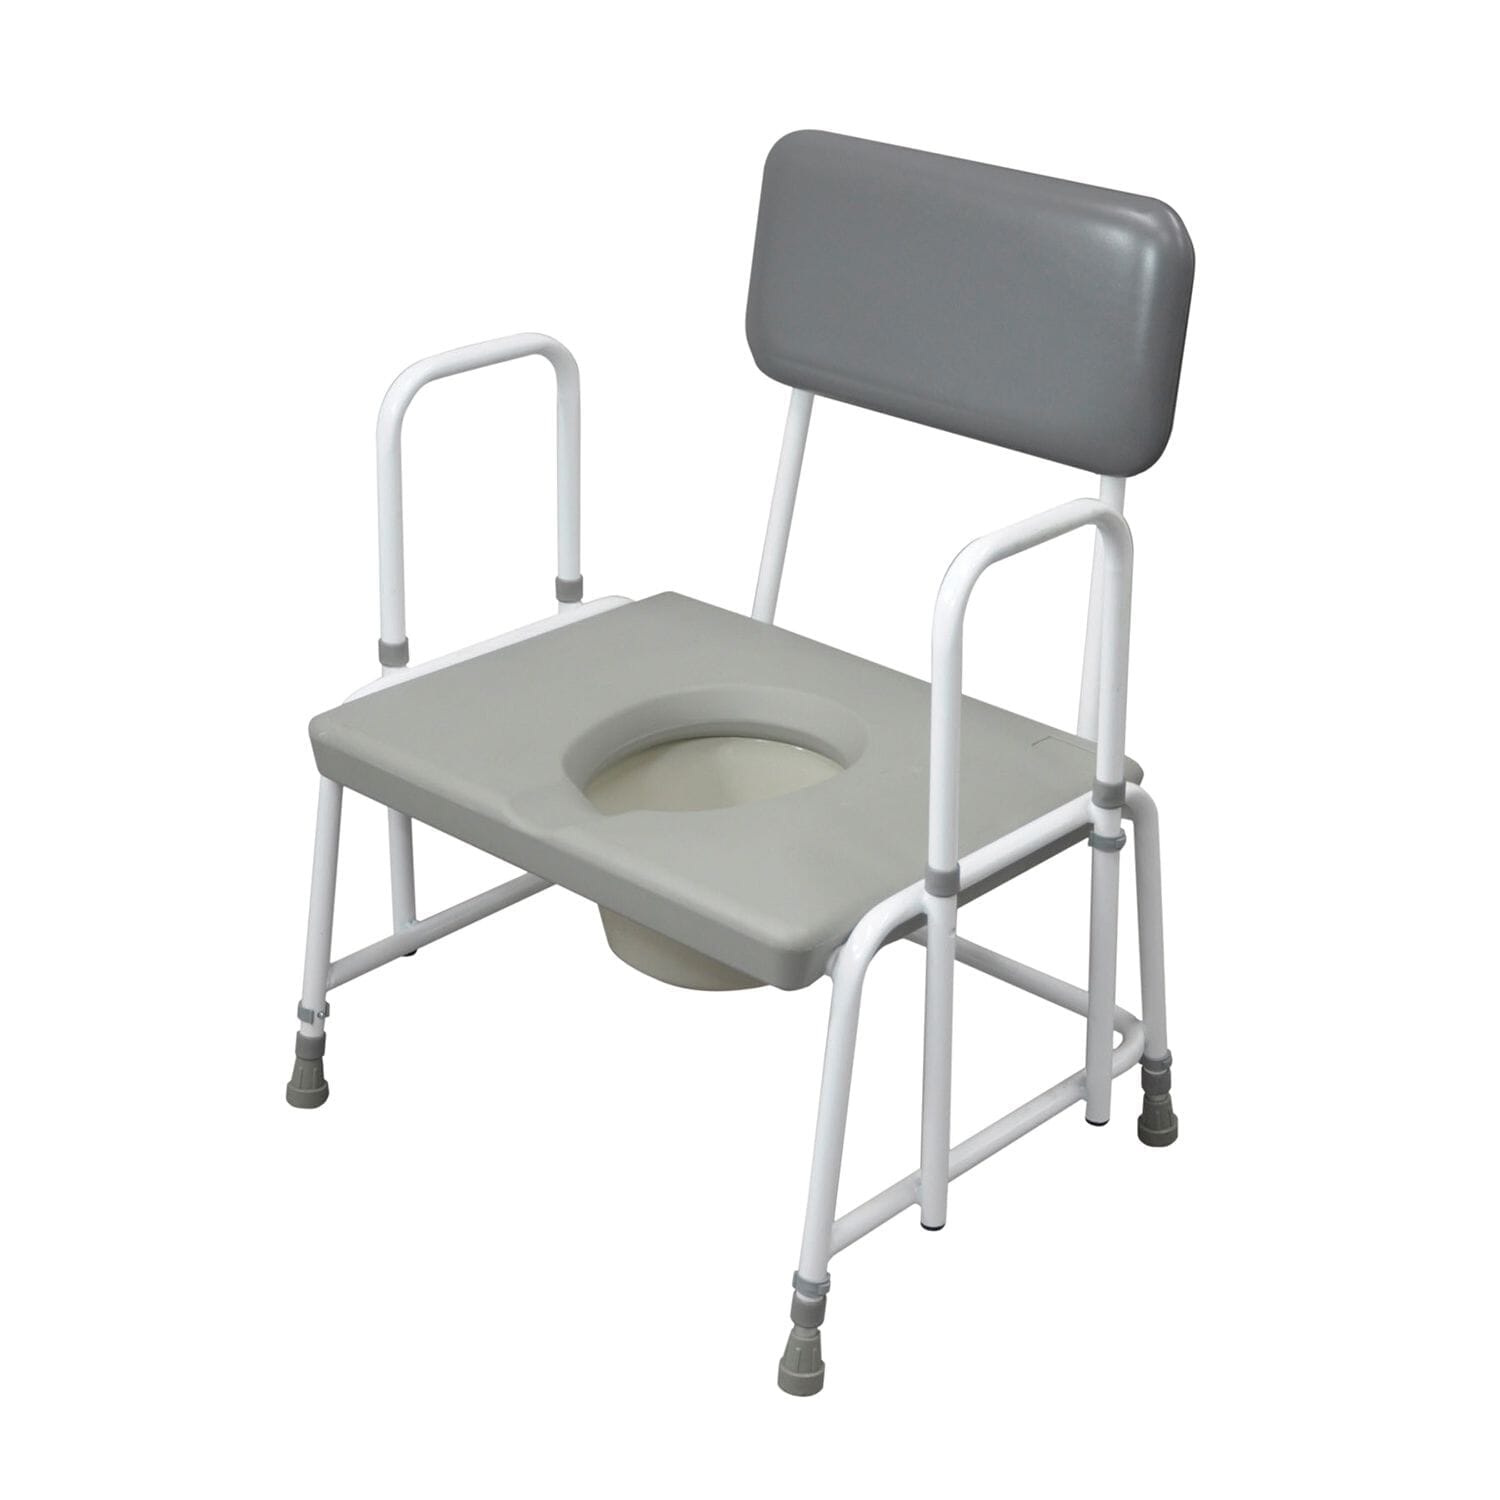 View Dorset Devon and Suffolk Bariatric Commodes Detachable Arms information